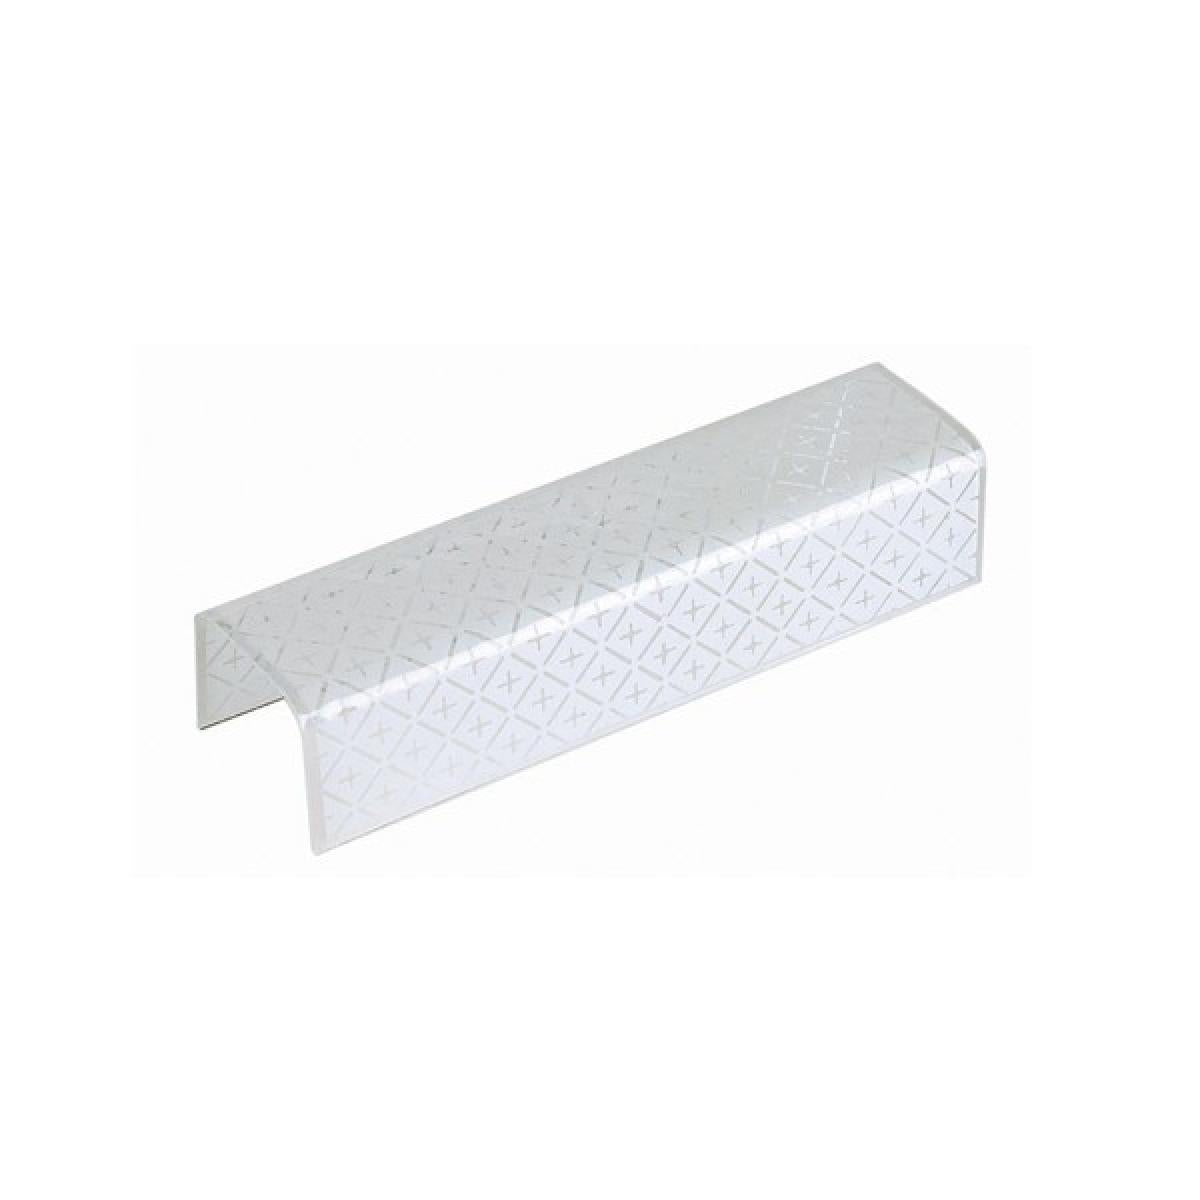 Satco 50-236 24 in. U-Channel Shade Horizontal Hole Centered 6-1/2 in. From End 7/16 in. 1/8 Slip White